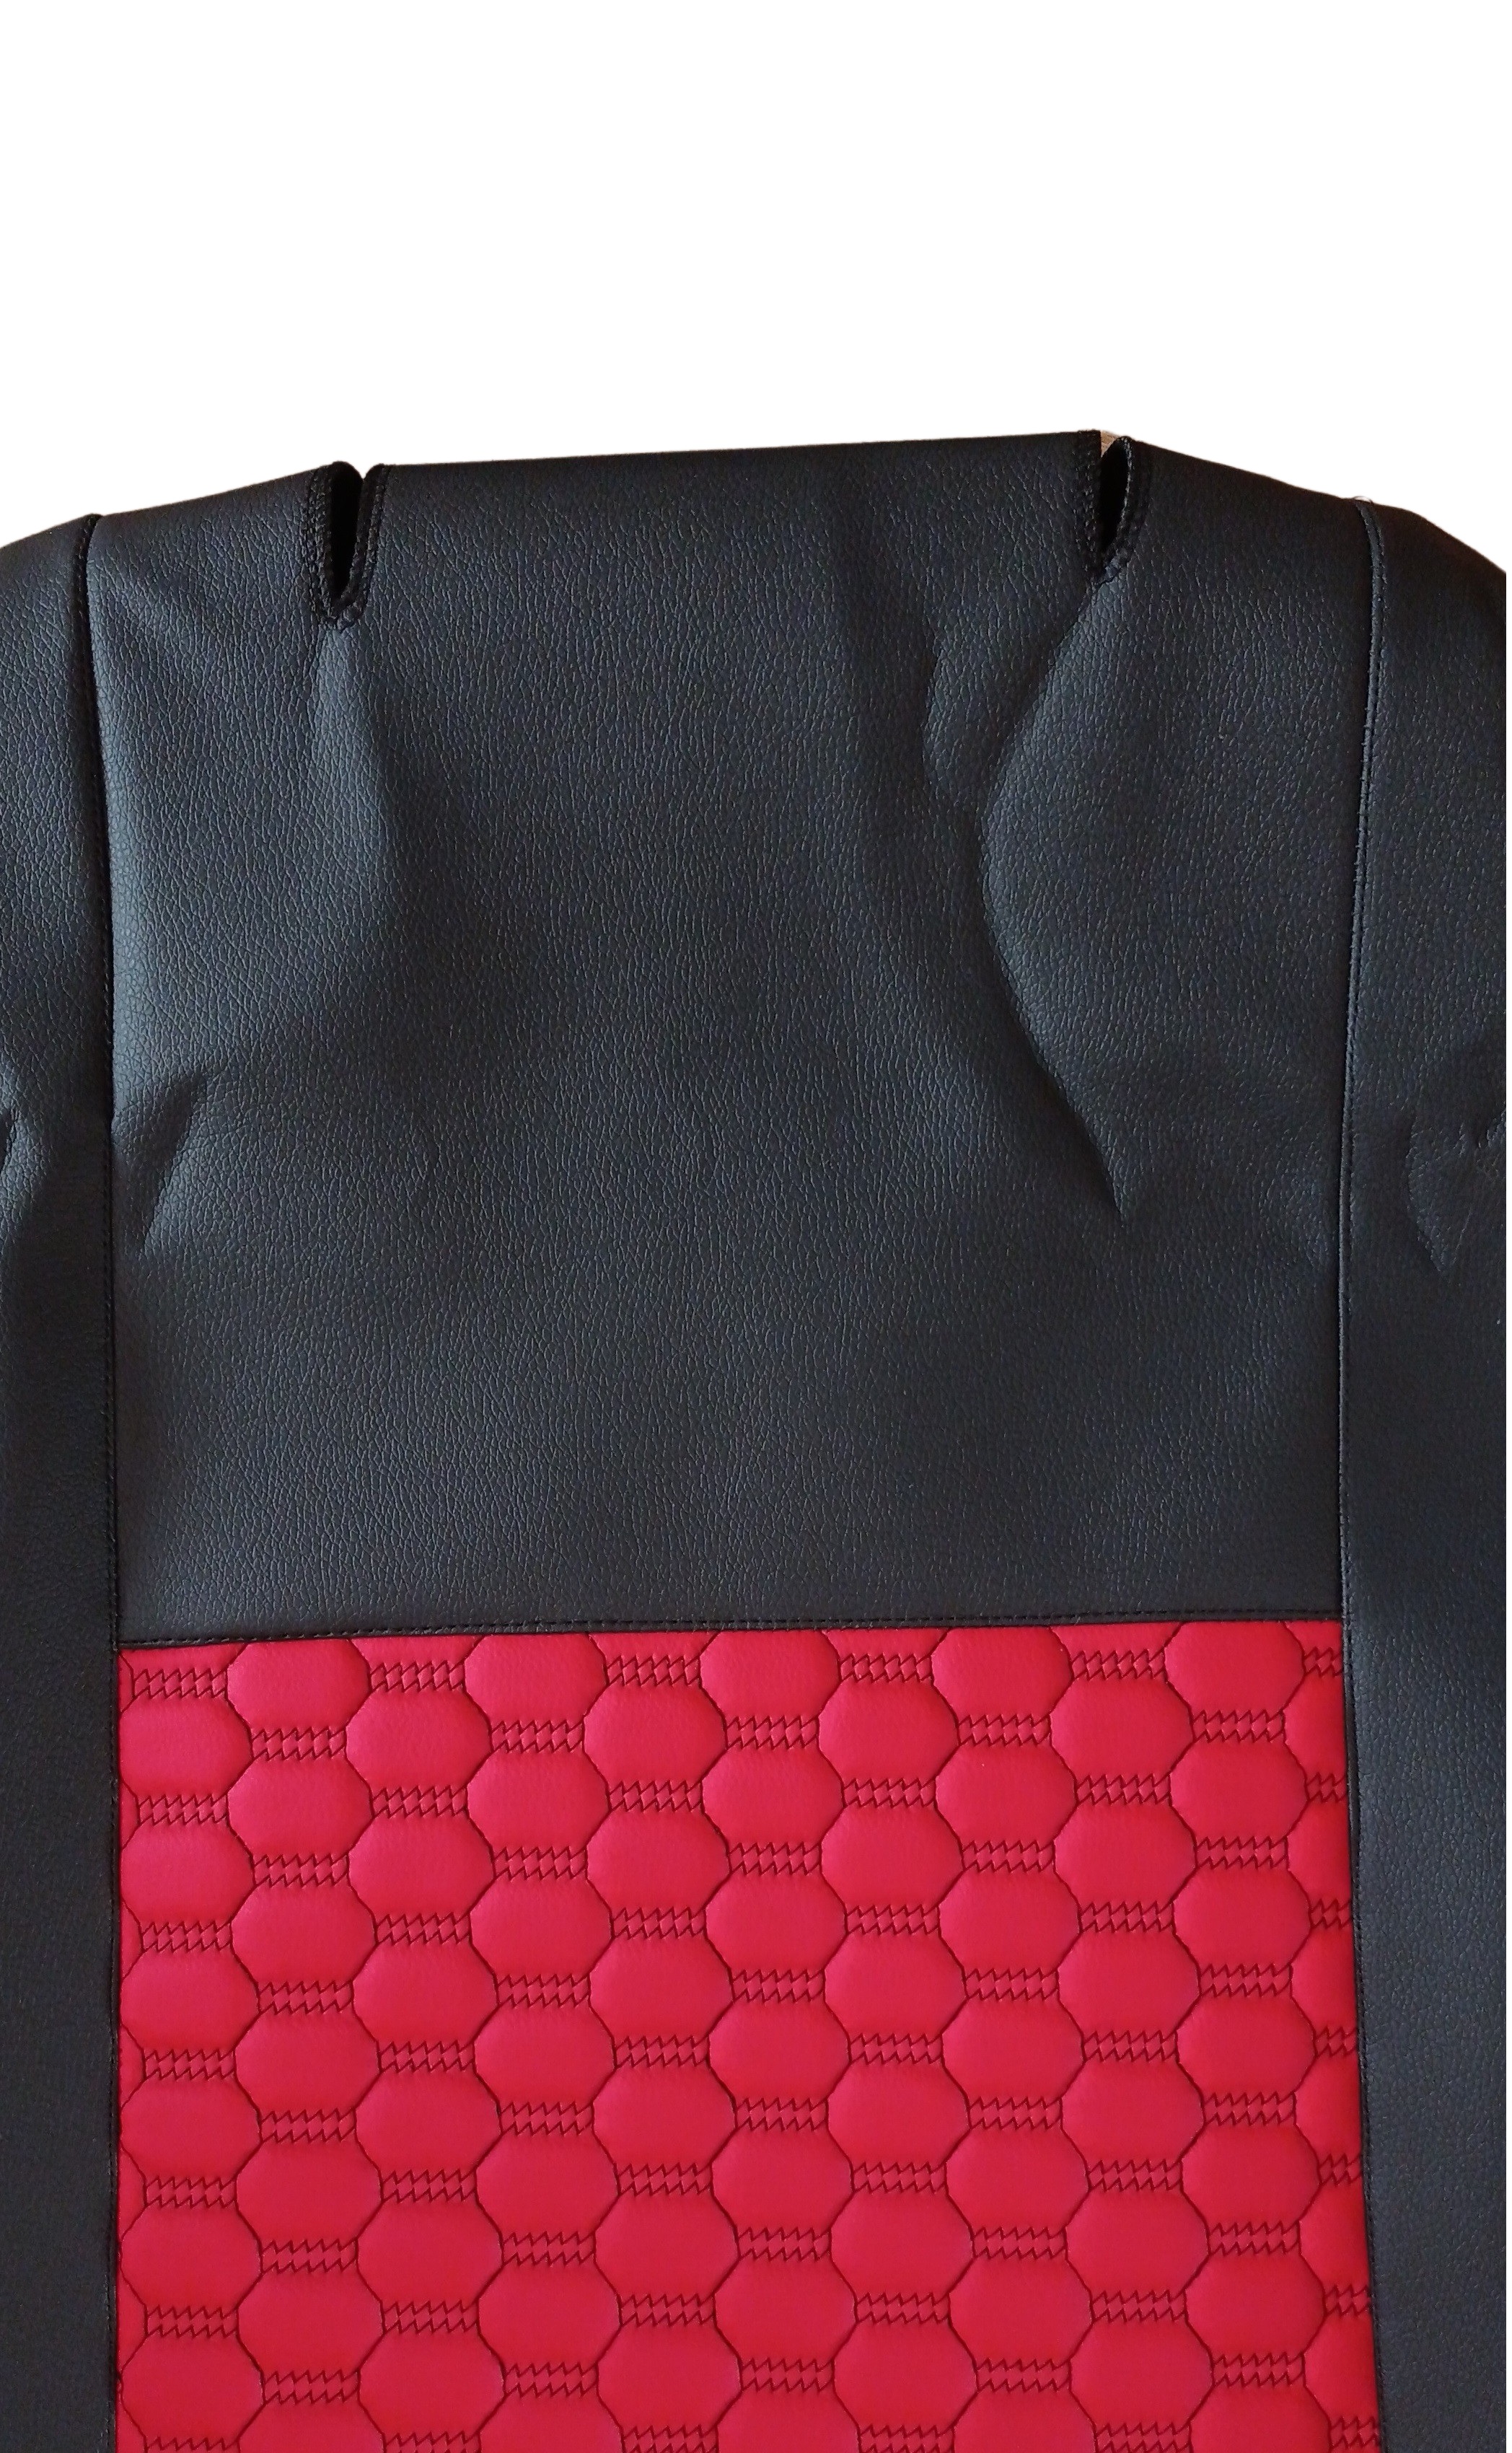 Seat covers for IVECO DAILY 2006-2011 Van Black Red Leather 